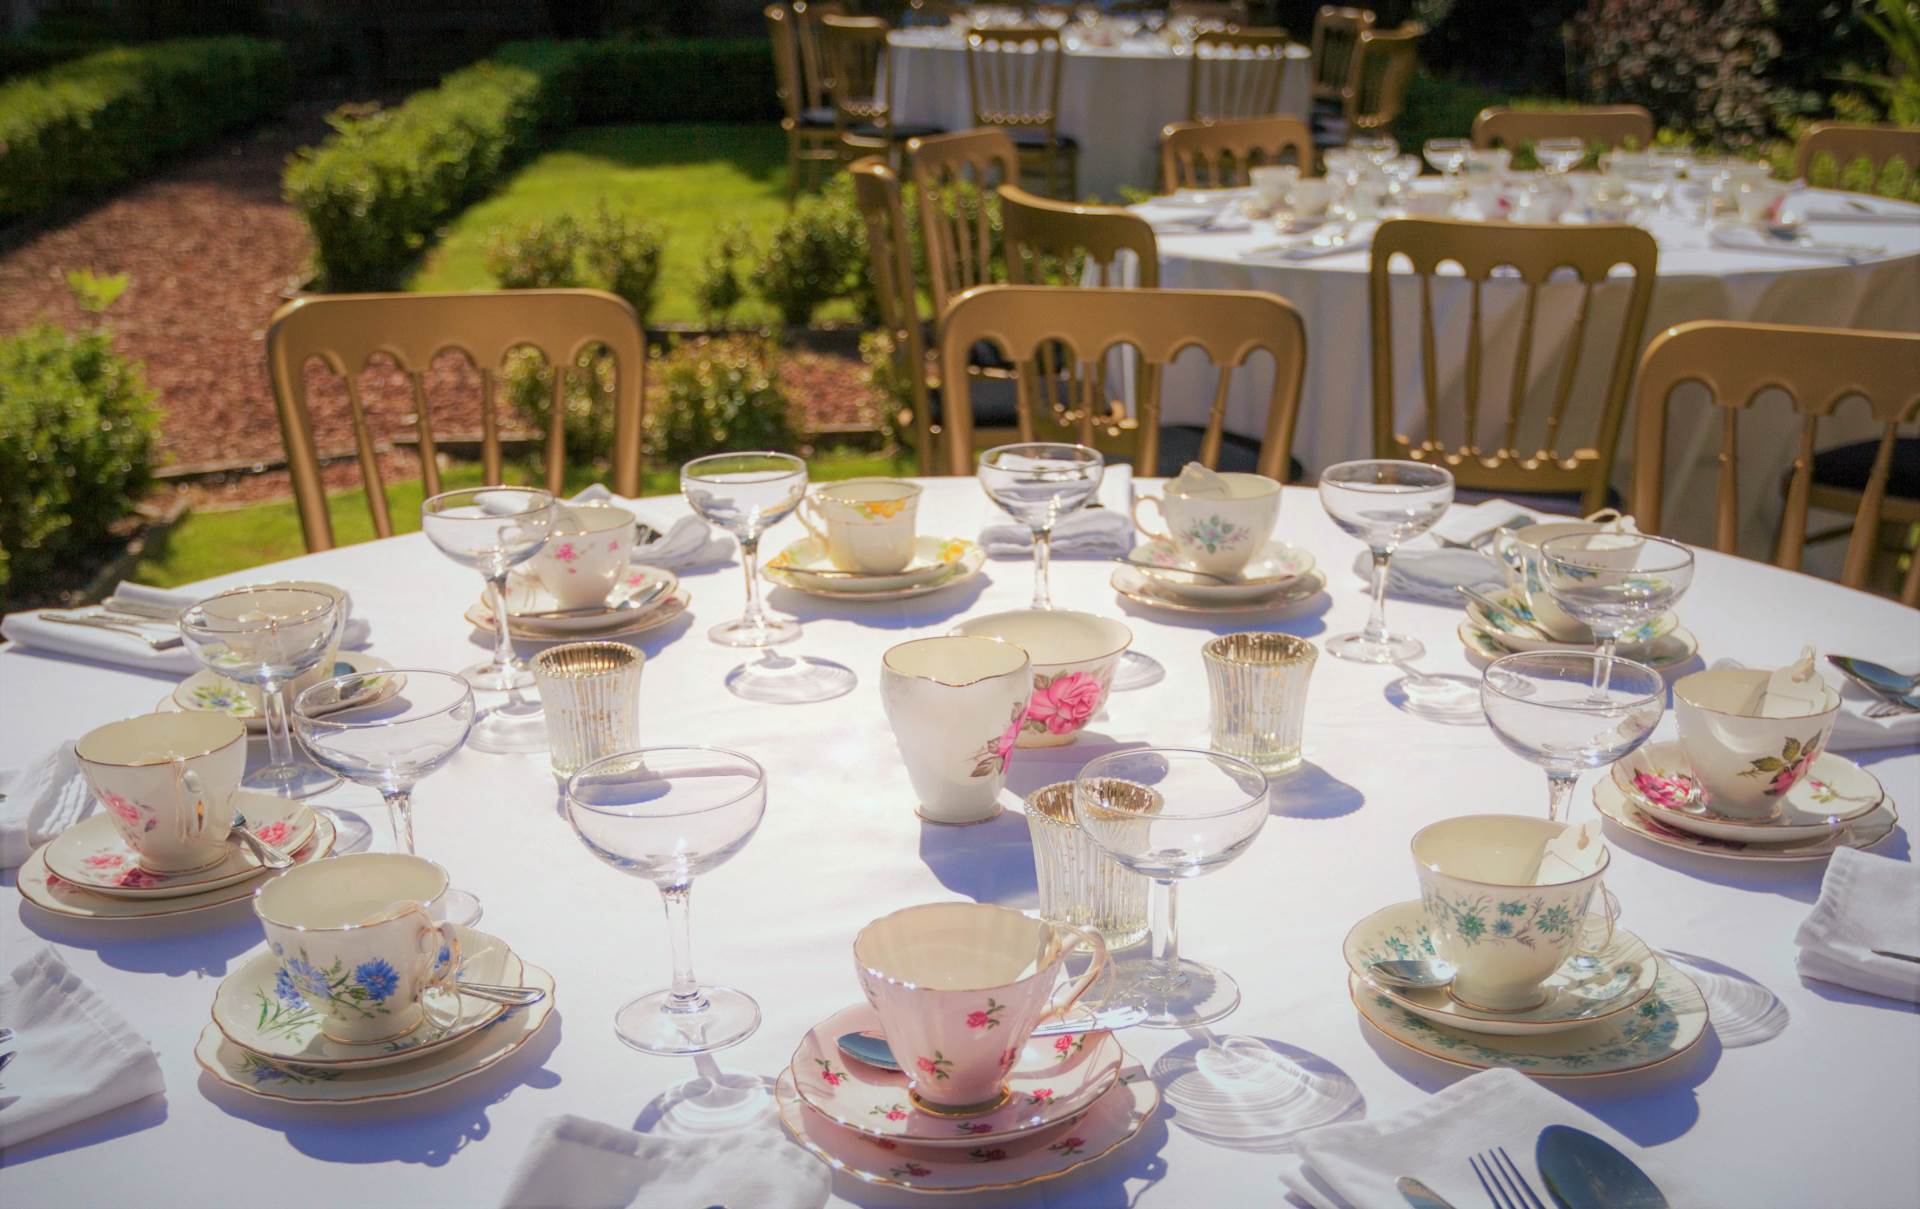 Styling ideas for a vintage wedding using vintage china